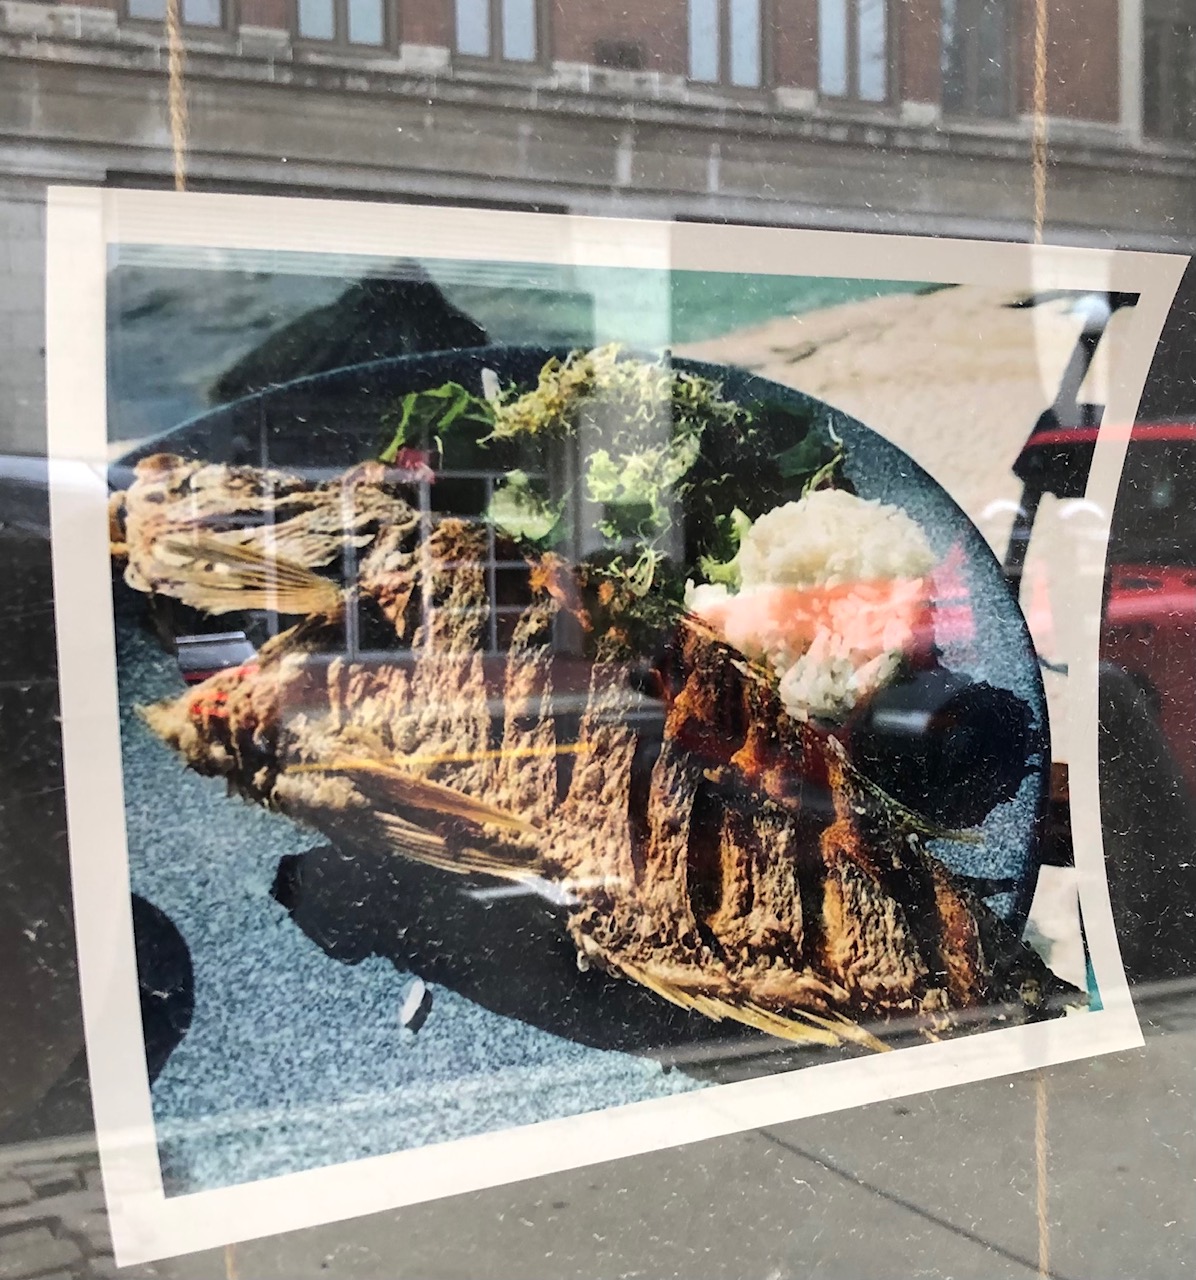 In a print out of a photo taped to the inside of a window, there is a cooked whole fish with slices on the gills on a black plate. Photo by Alyssa Buckley.